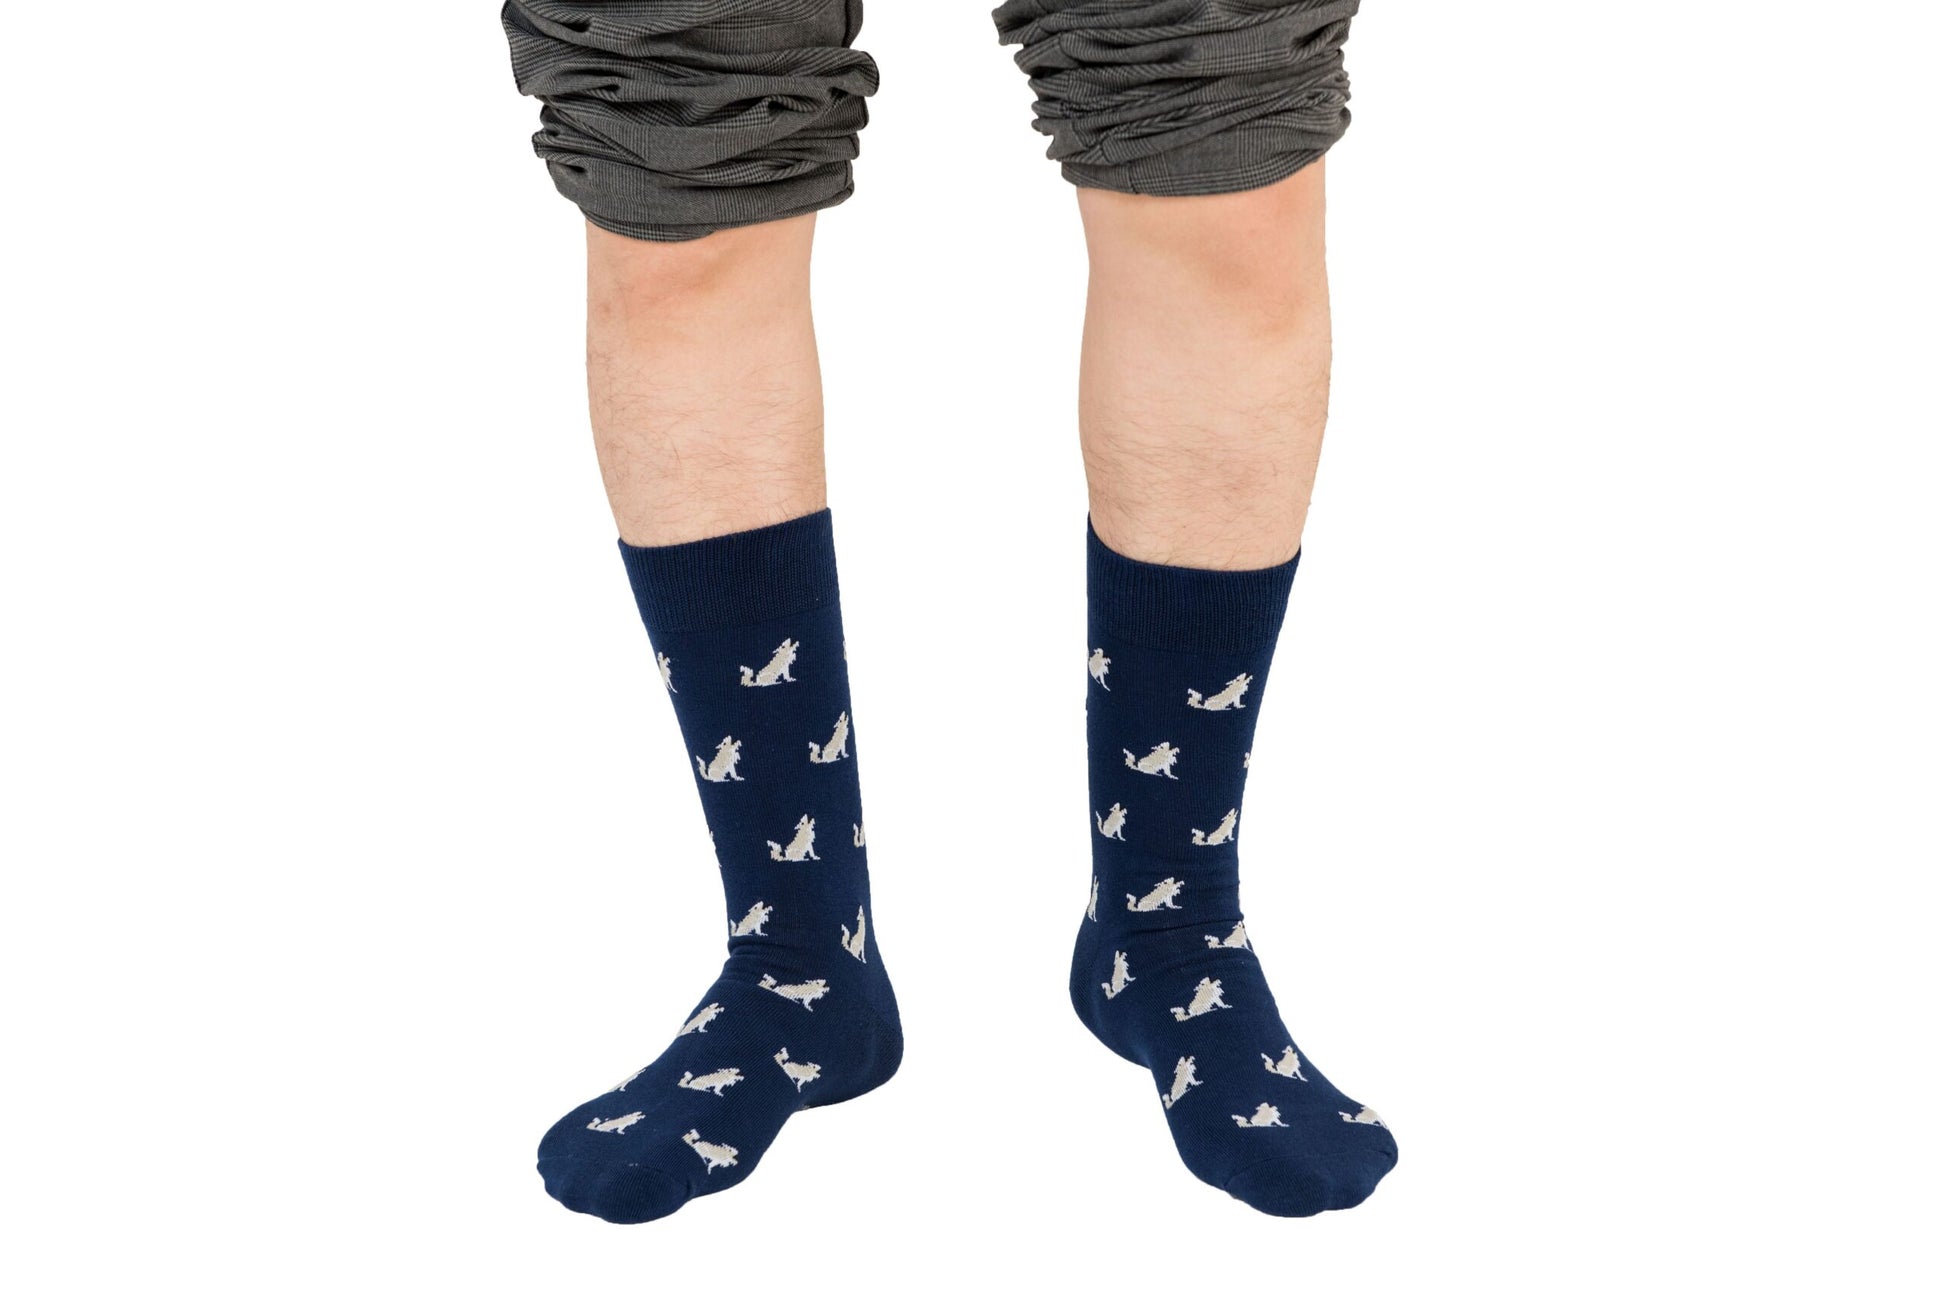 A person standing wearing Wolf Socks with white bird patterns, takes every step leading the pack, isolated on a white background.